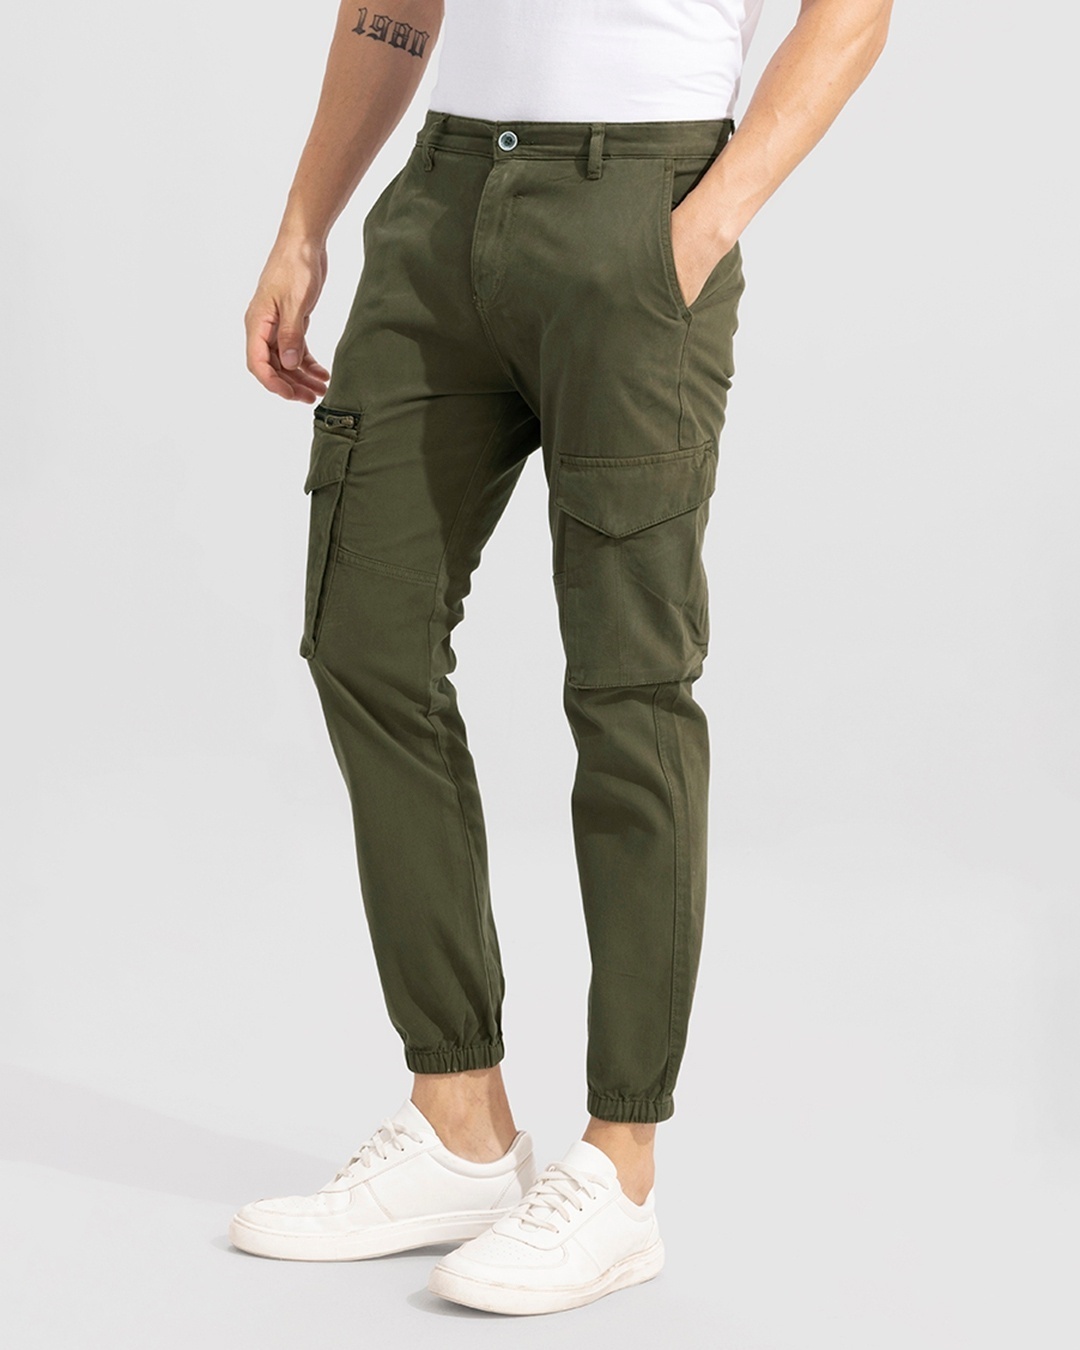 Wrangler Authentics Men's Relaxed Fit Stretch Cargo Pant, Olive at Amazon  Men's Clothing store